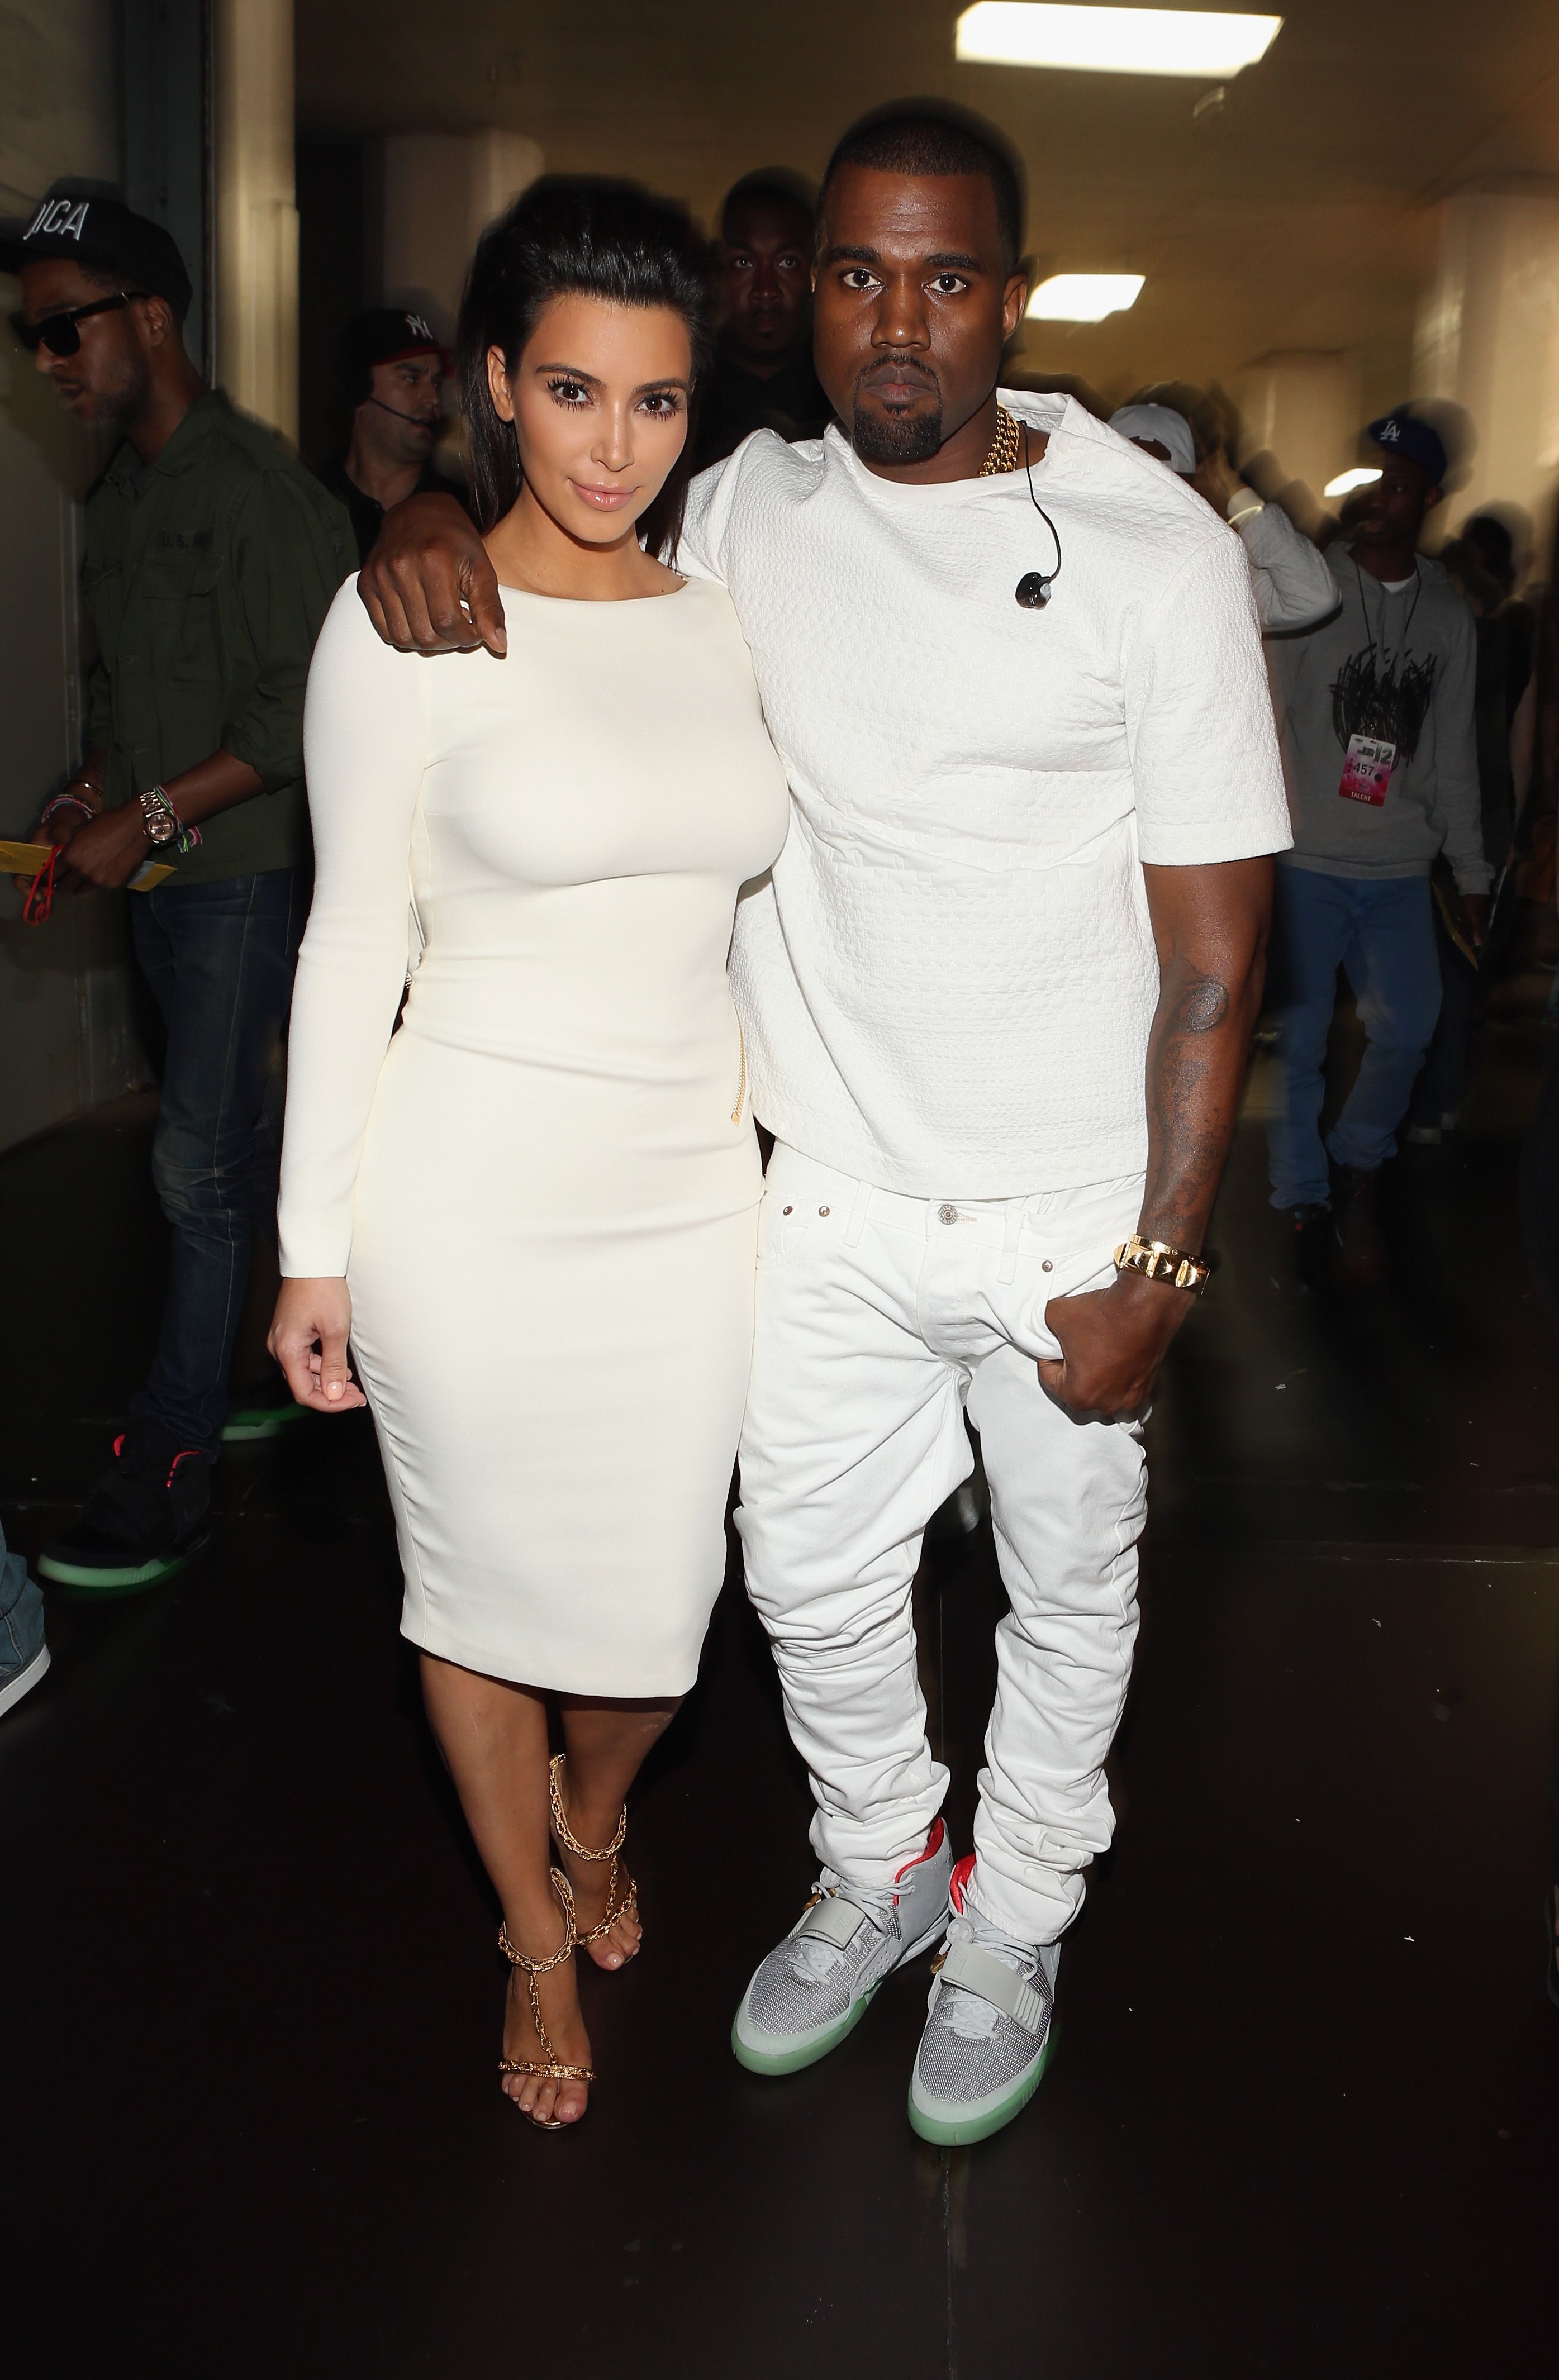 Kim Kardashian and Kanye West at the BET Awards held at The Shrine Auditorium on July 1, 2012. | Photo: Getty Images